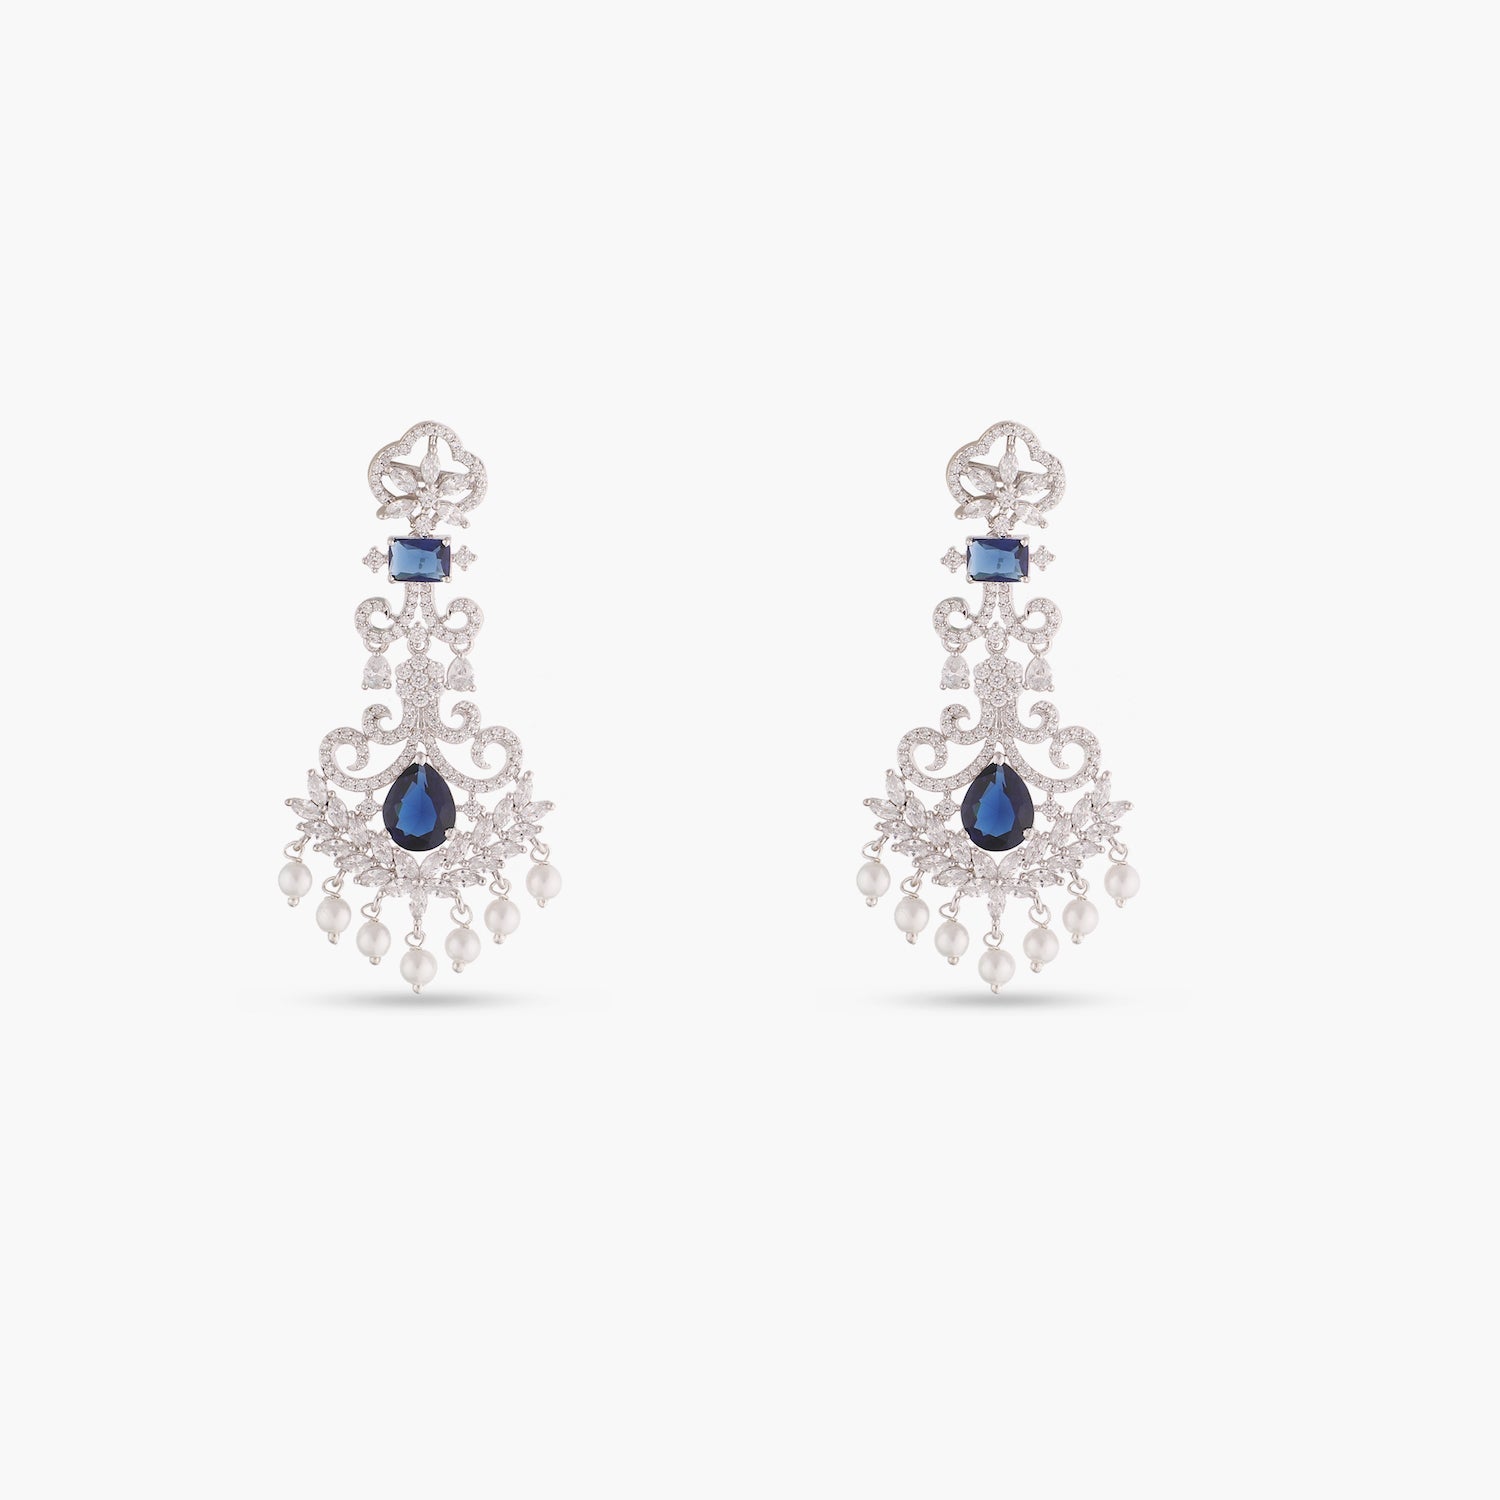 Claire Delicate CZ Earrings